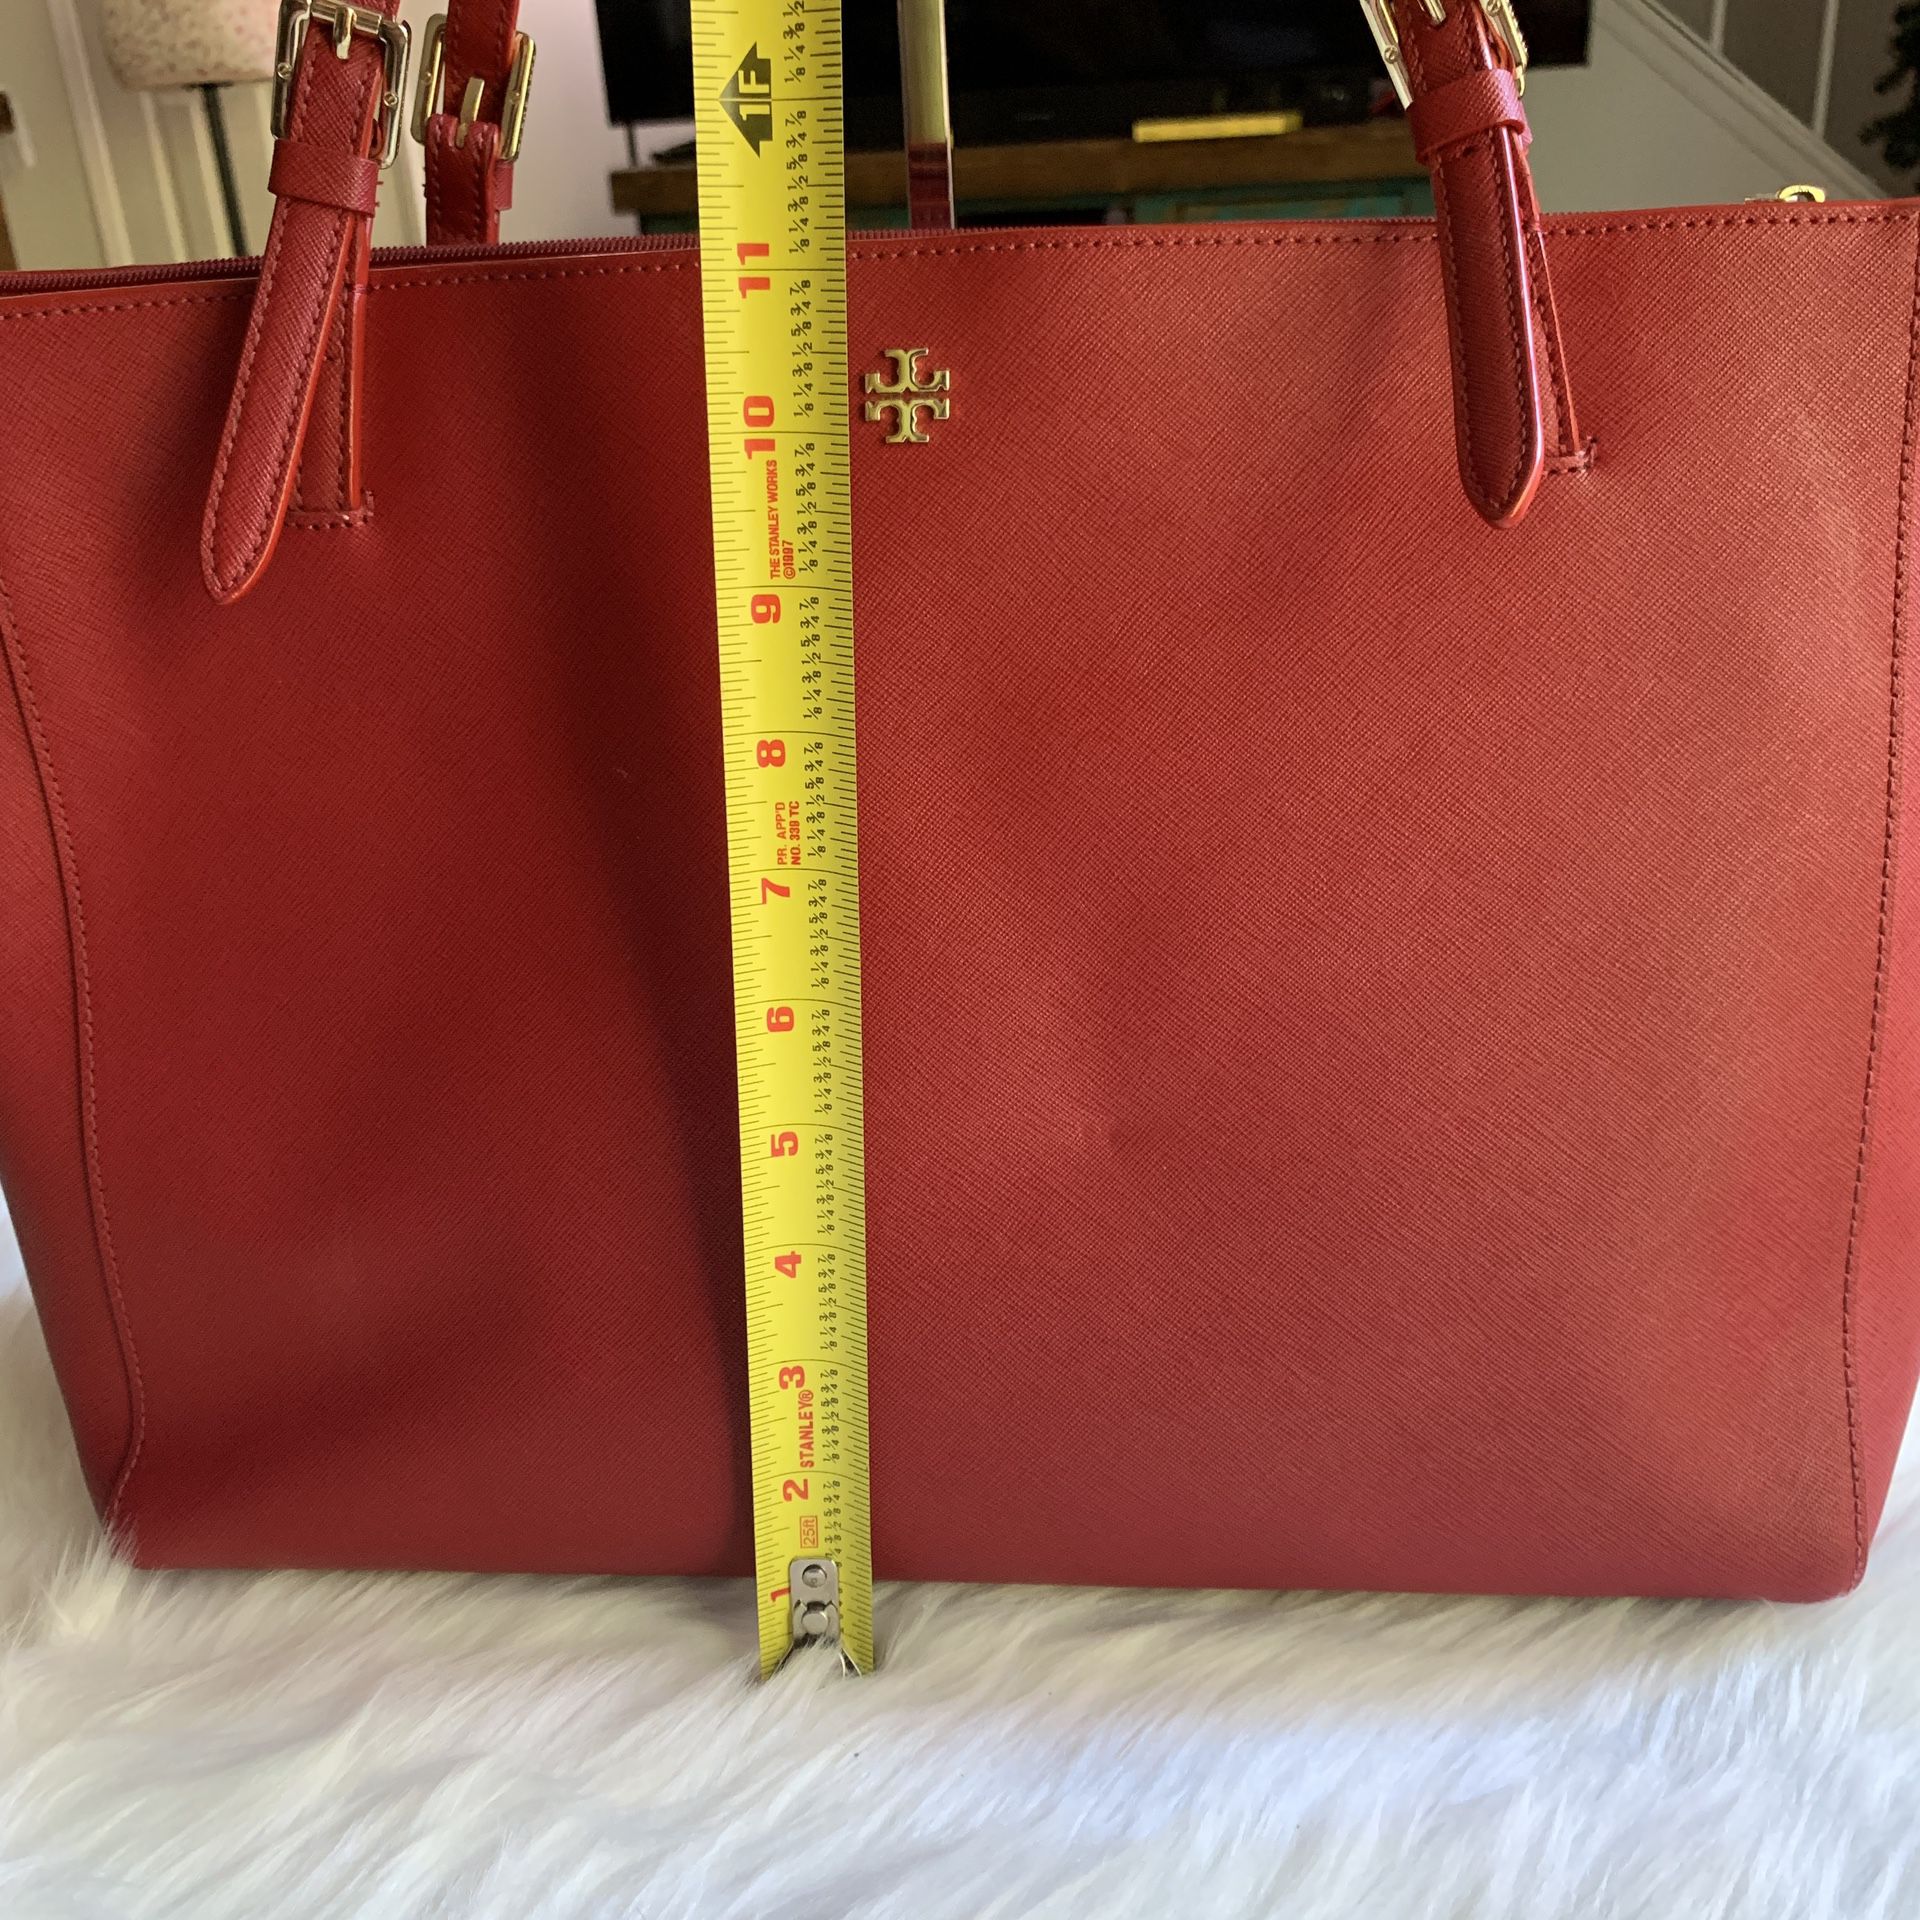 Tory Burch York Small Buckle Tote for Sale in Chantilly, VA - OfferUp